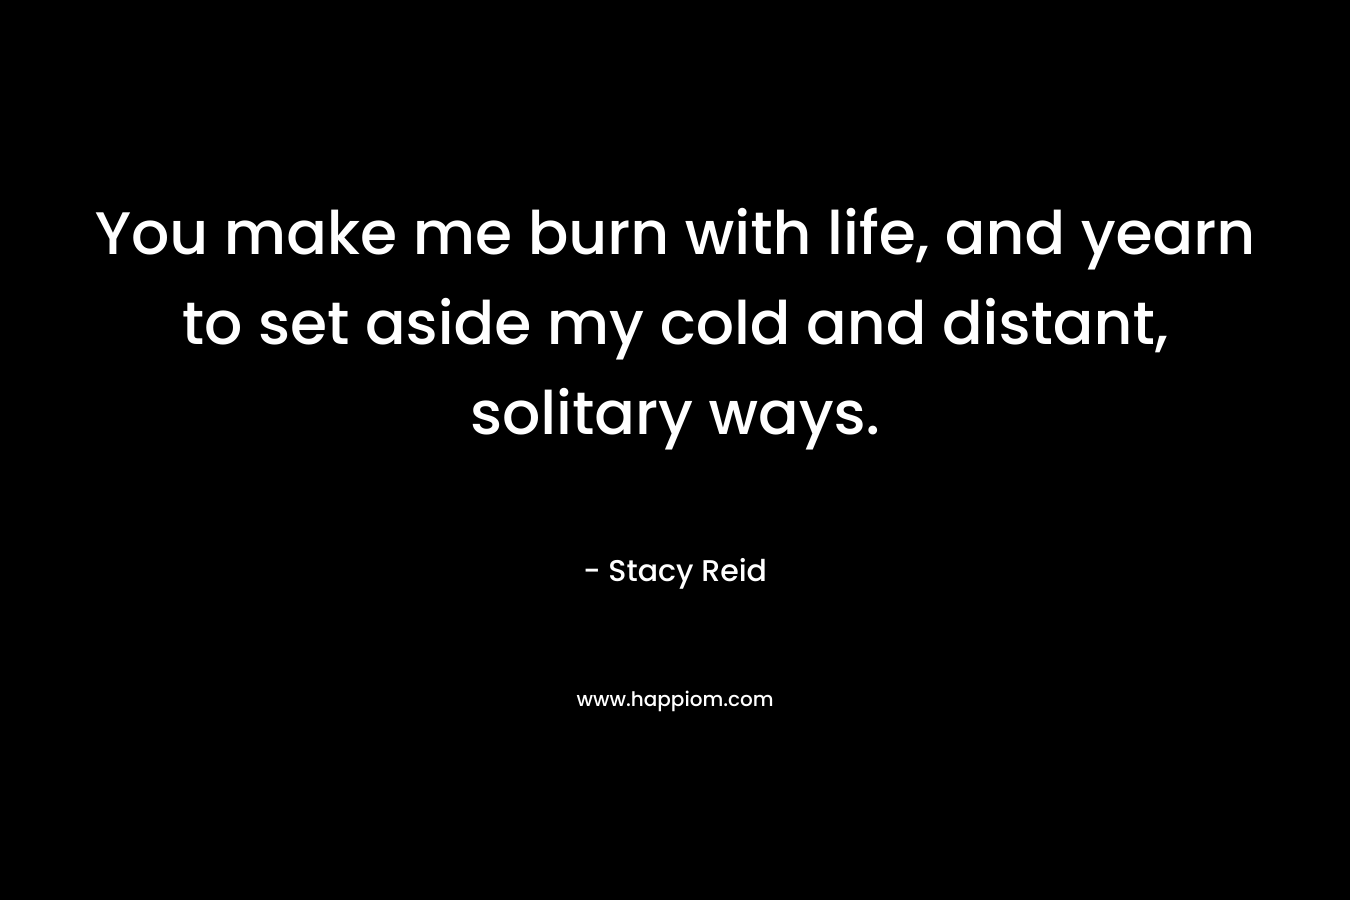 You make me burn with life, and yearn to set aside my cold and distant, solitary ways. – Stacy Reid